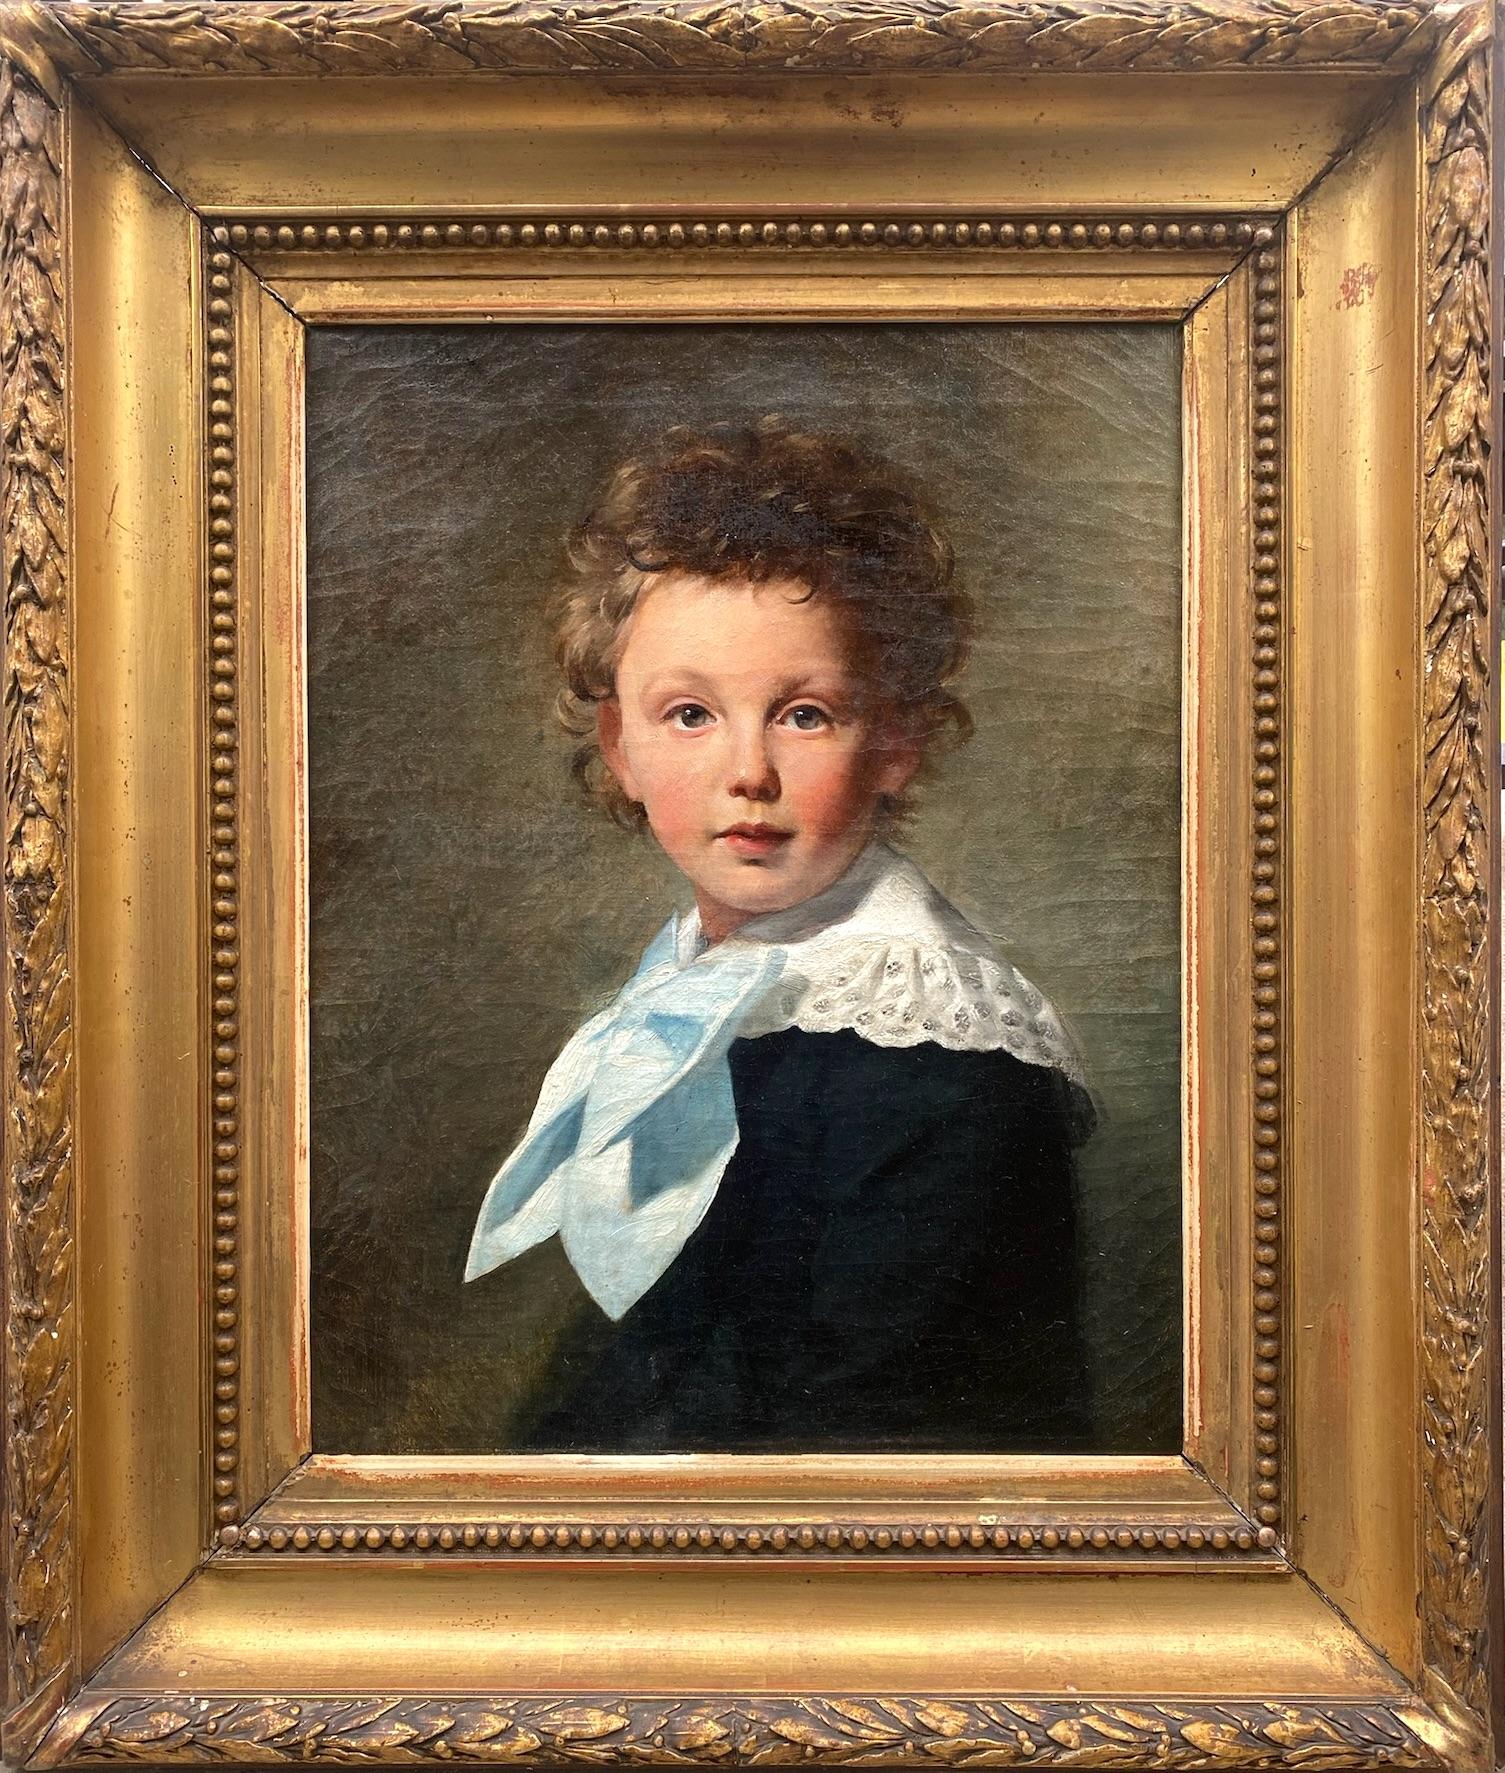 The blue bow: a little boy with tousled hair naturalistic portrait oil painting